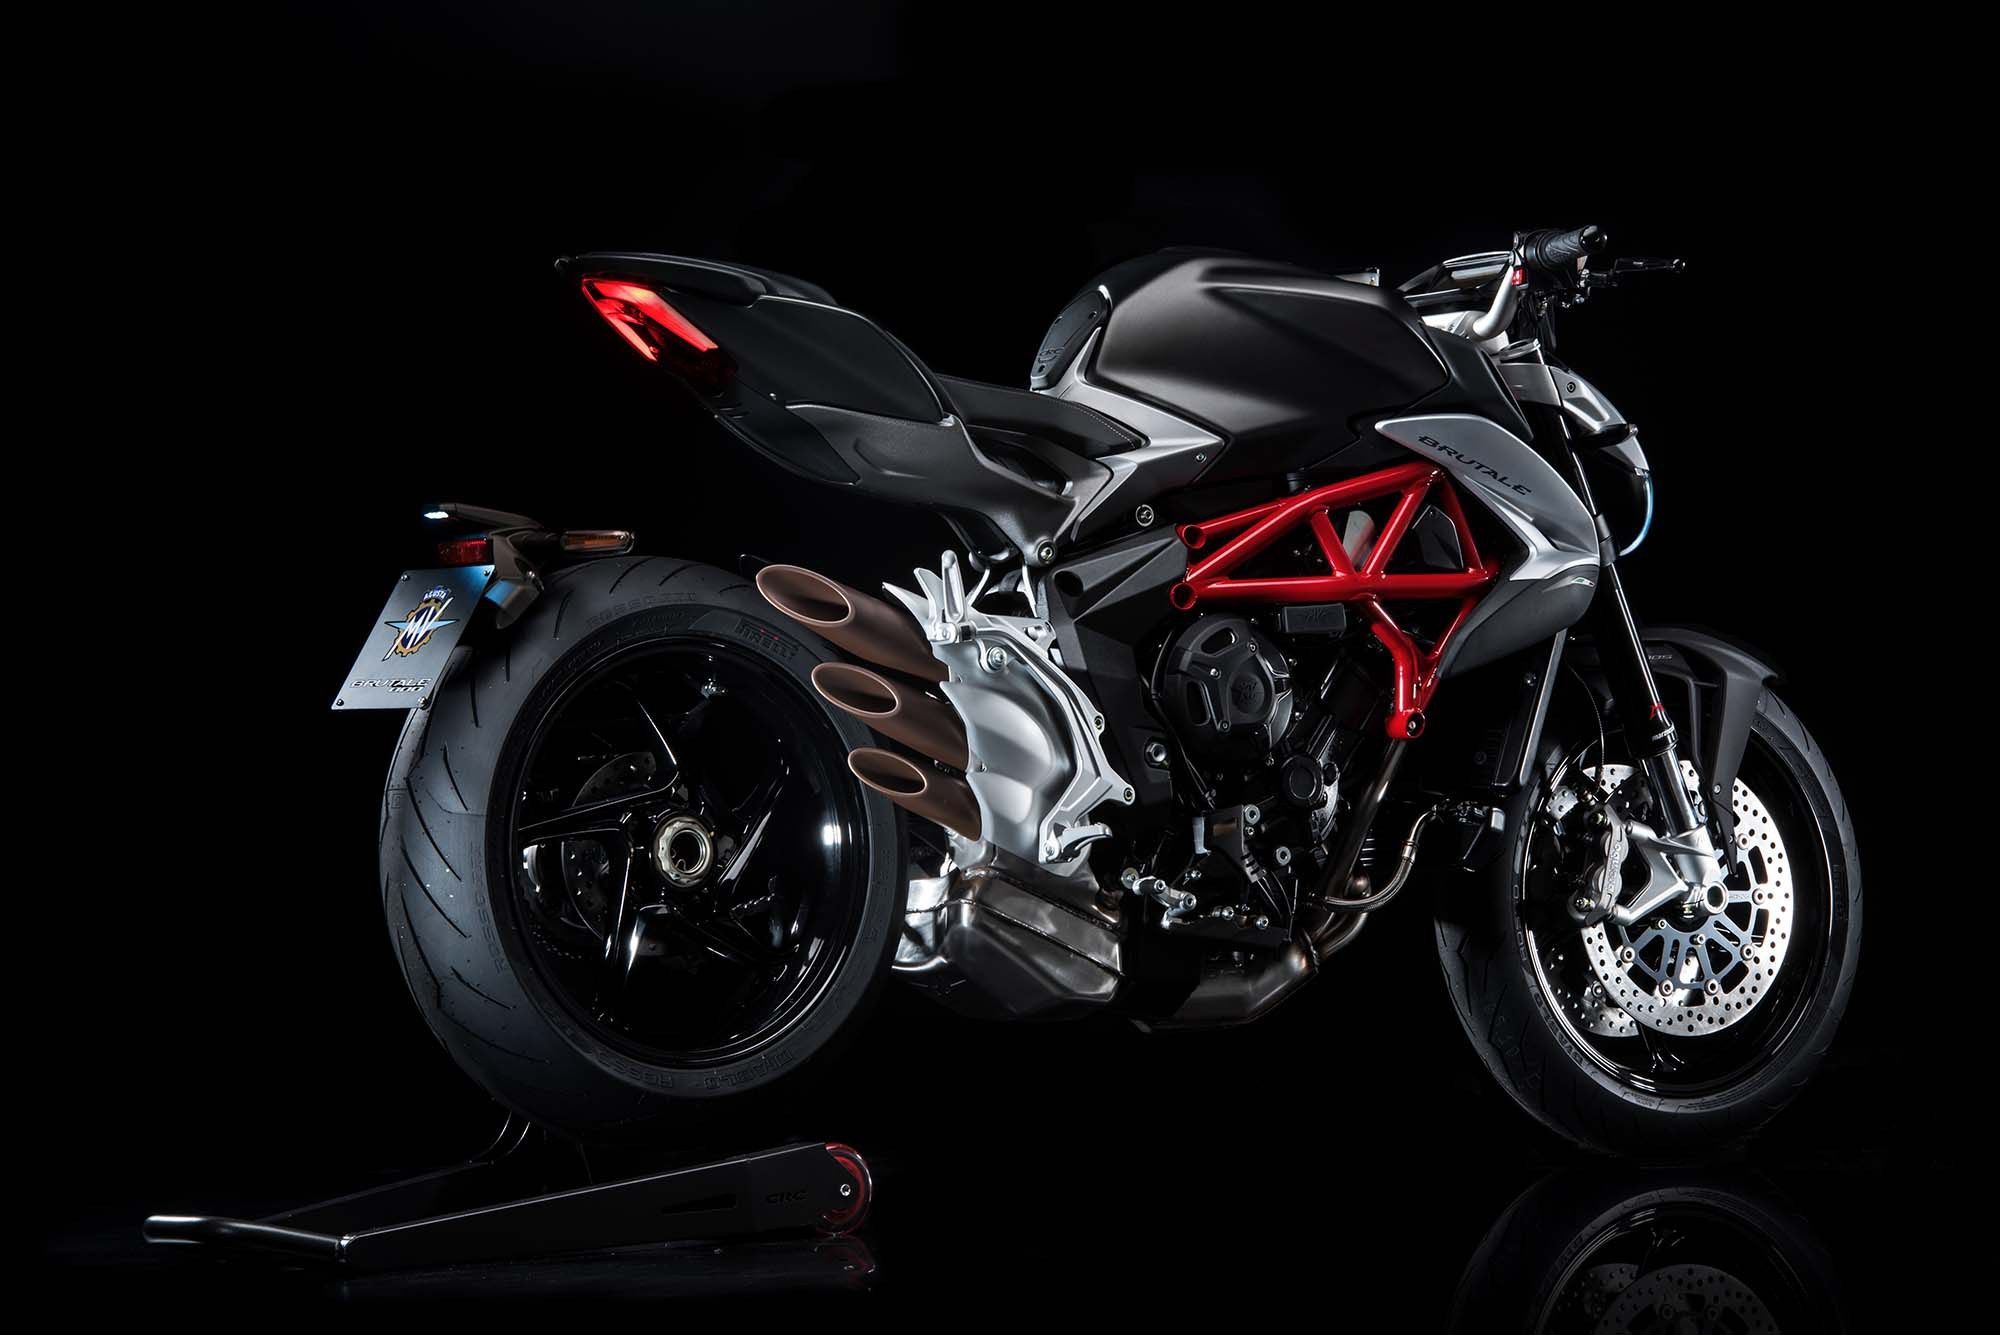 The 2016 MV Agusta Brutale 800: A little more beastly.